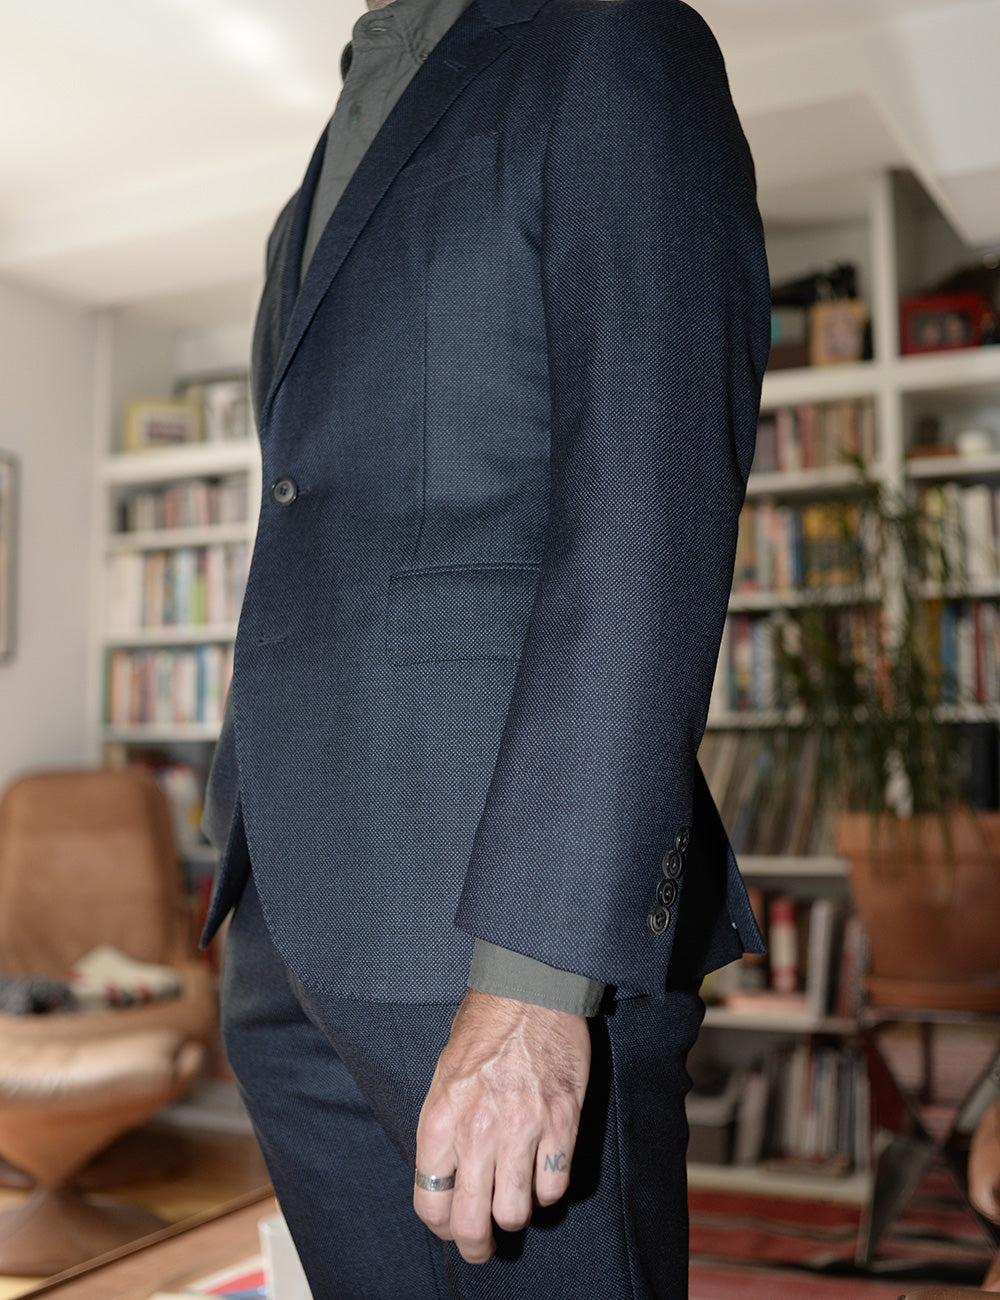 On-body shot of BKT50 Tailored Jacket in Birdseye Weave - Navy. Model is wearing jacket with matching pants and green button down shirt. Photo taken from side